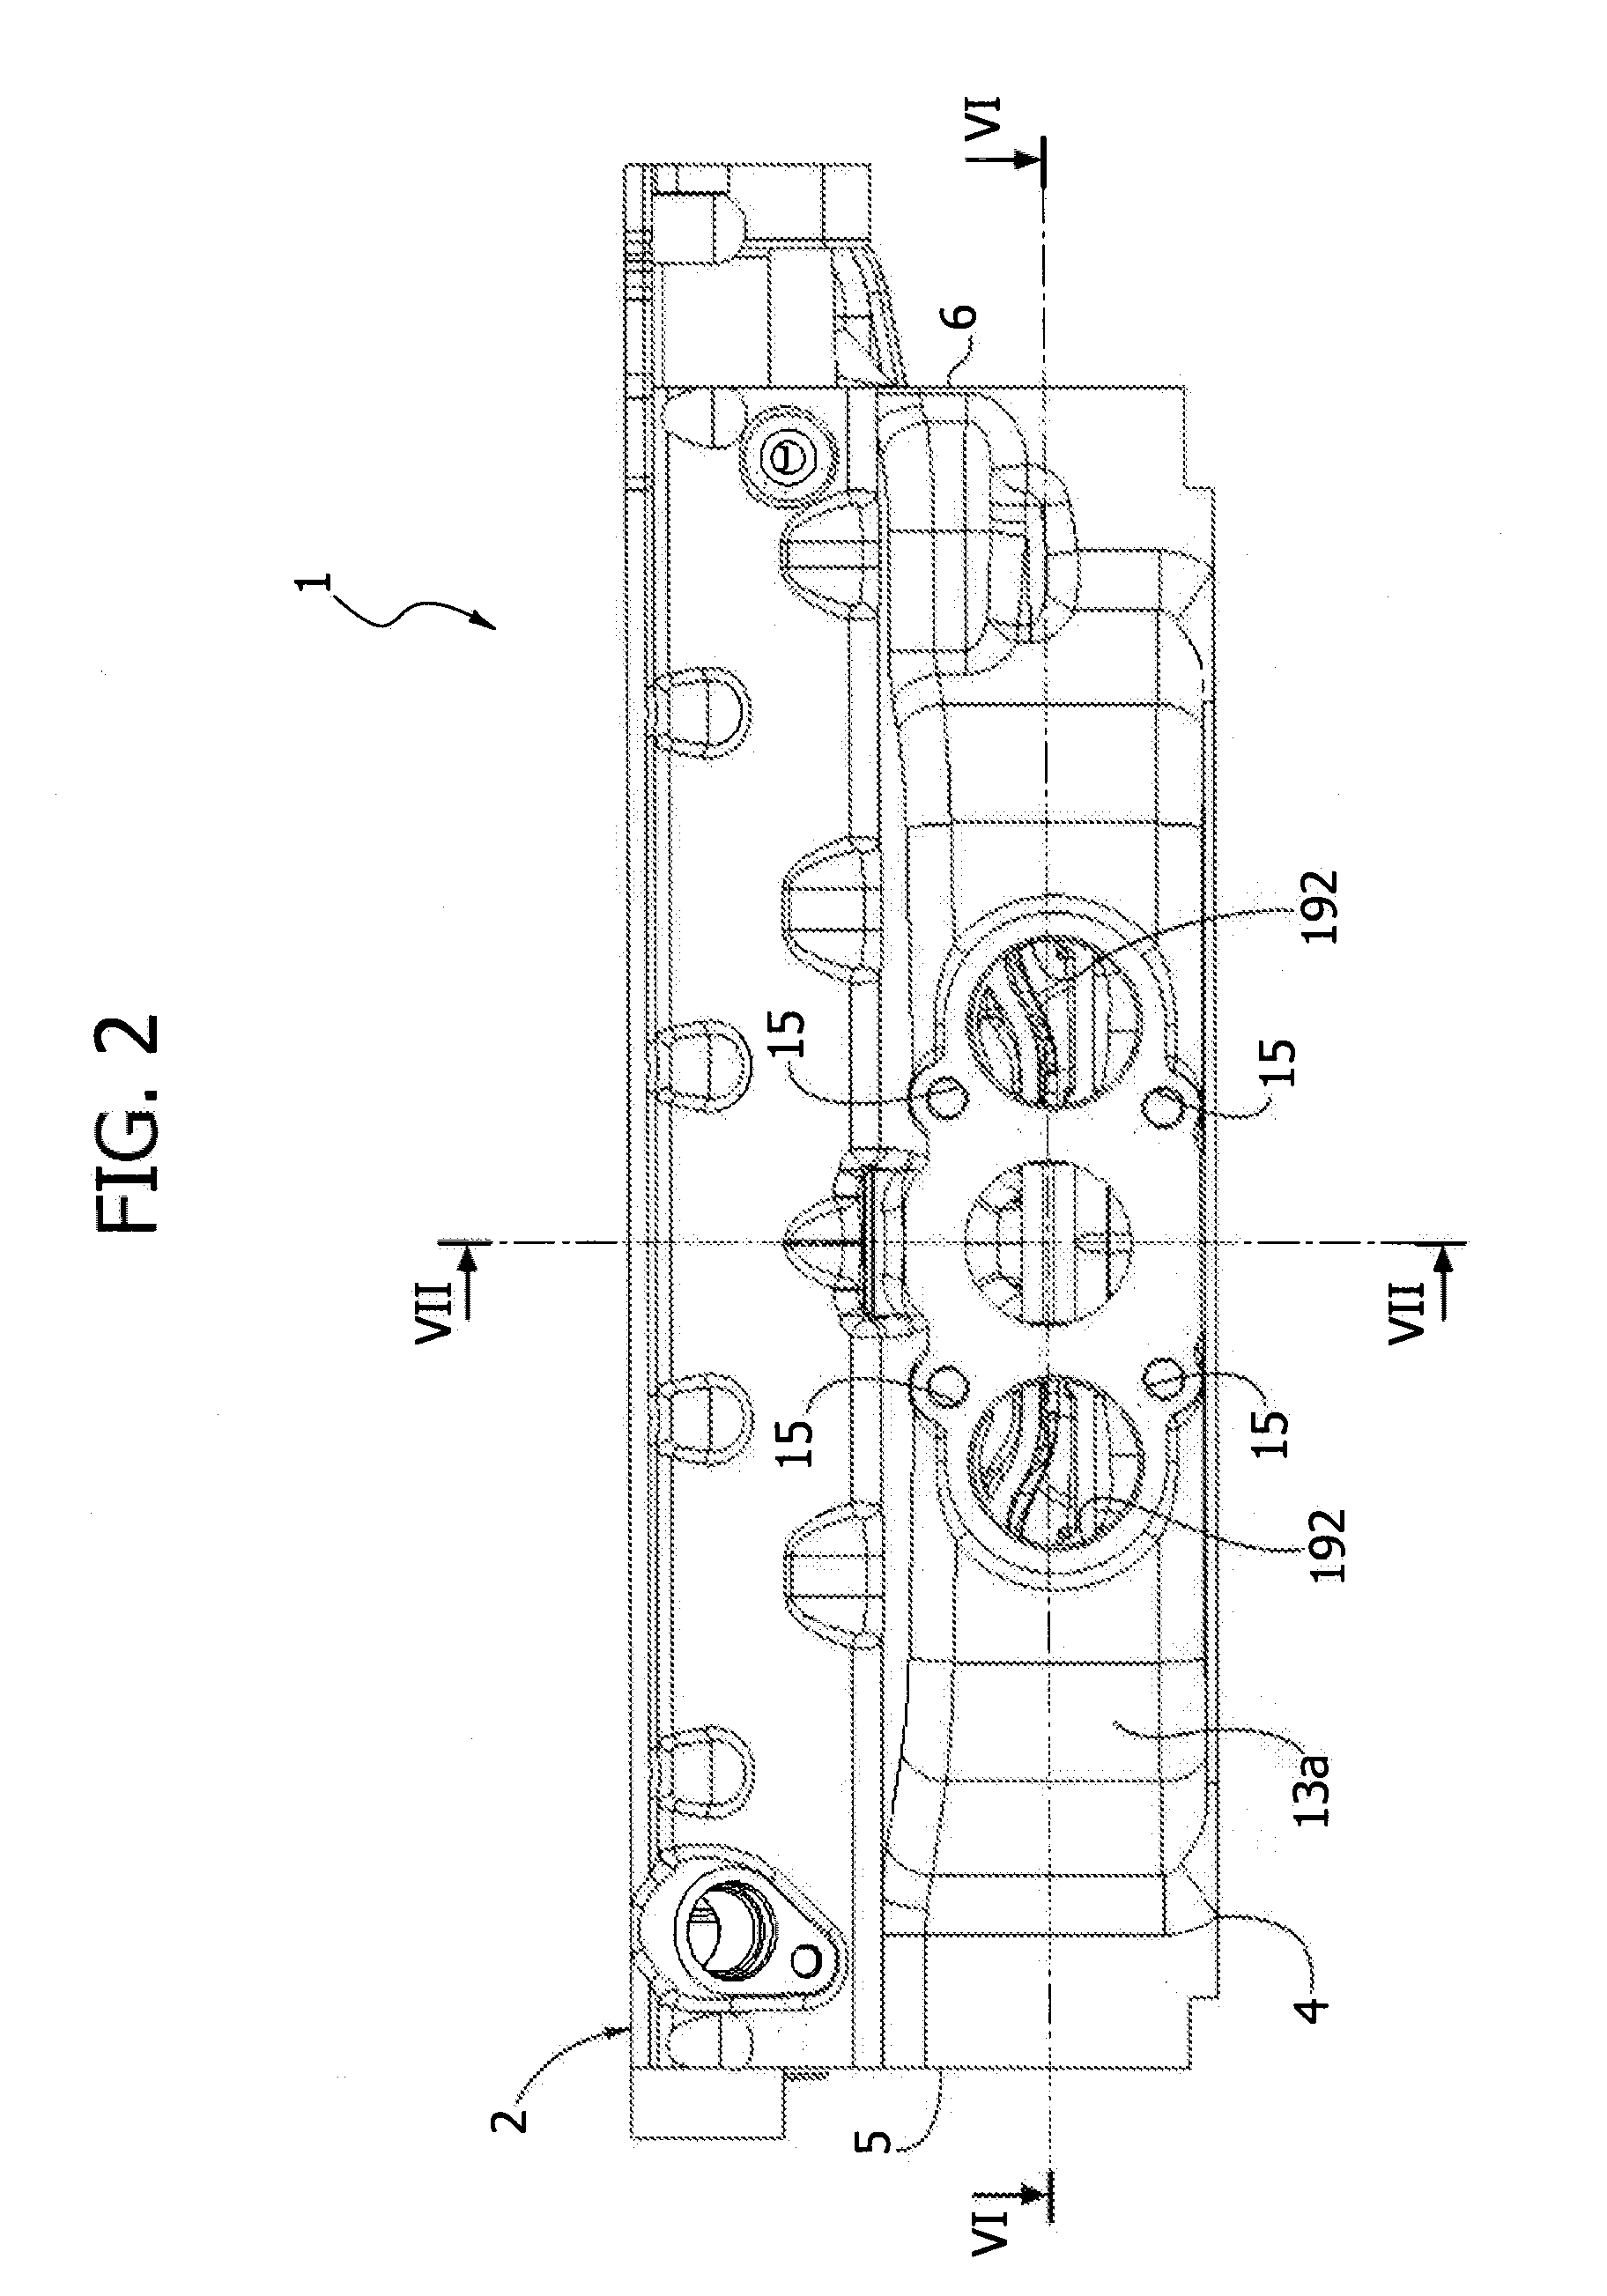 Cylinder head for an internal combustion engine, with integrated exhaust manifold and subgroups of exhaust conduits merging into manifold portions which are superimposed and spaced apart from each other